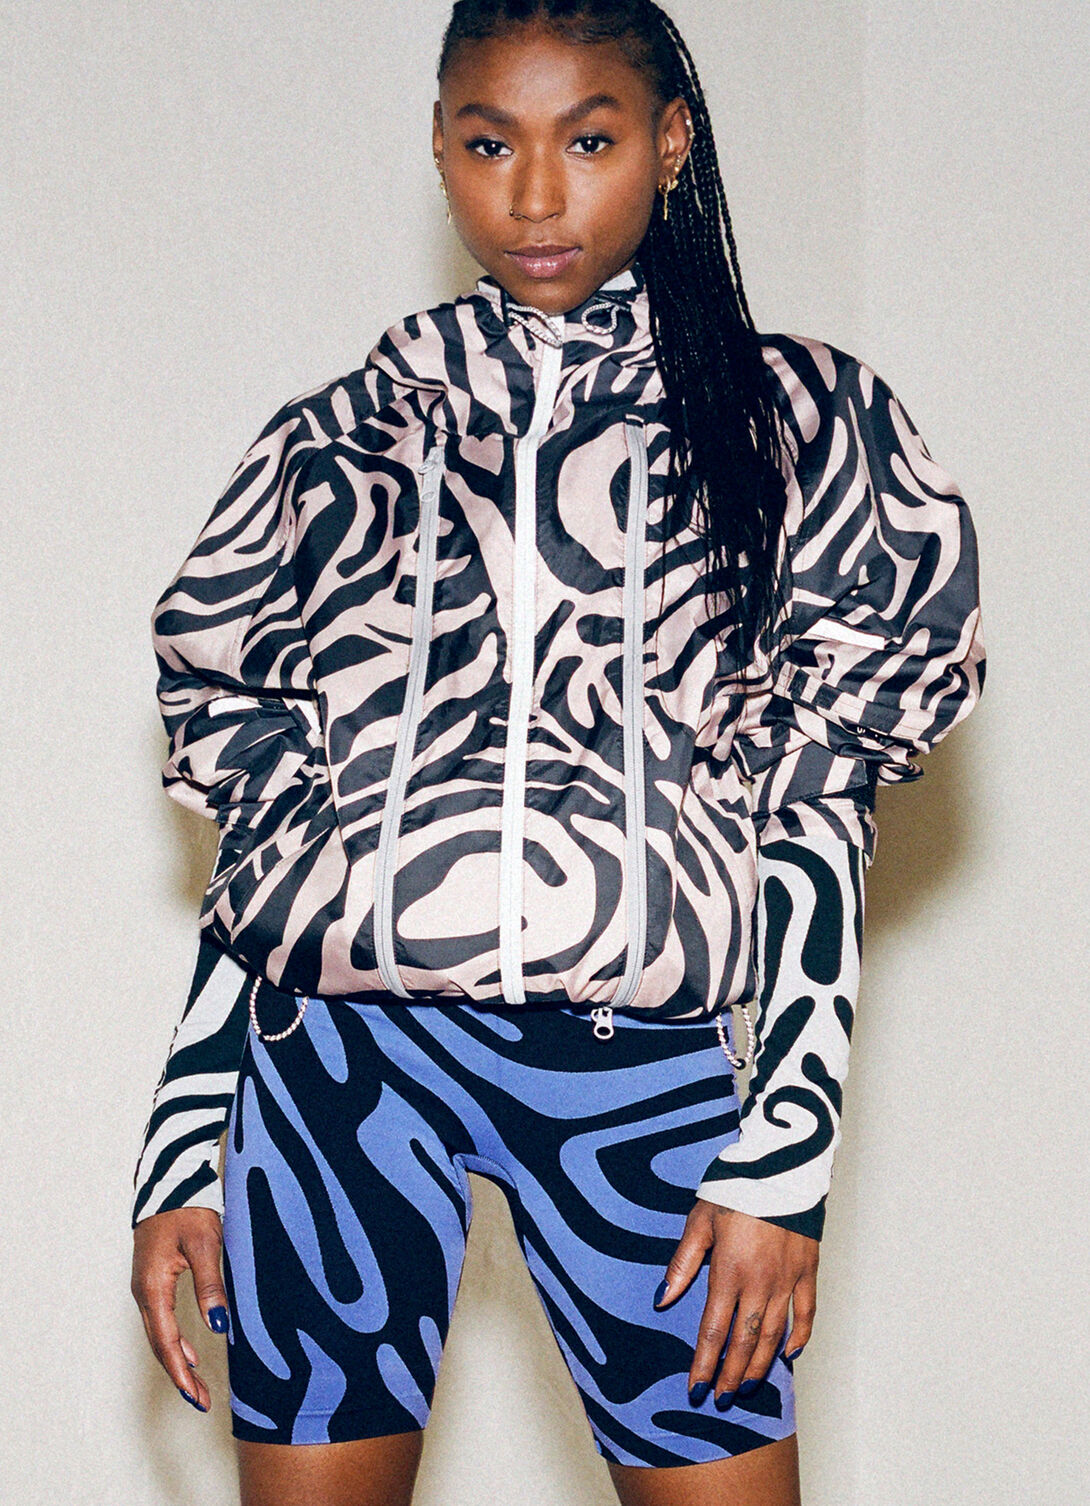 Stella McCartney Teams Up With Adidas For Their Futureplayground Collection